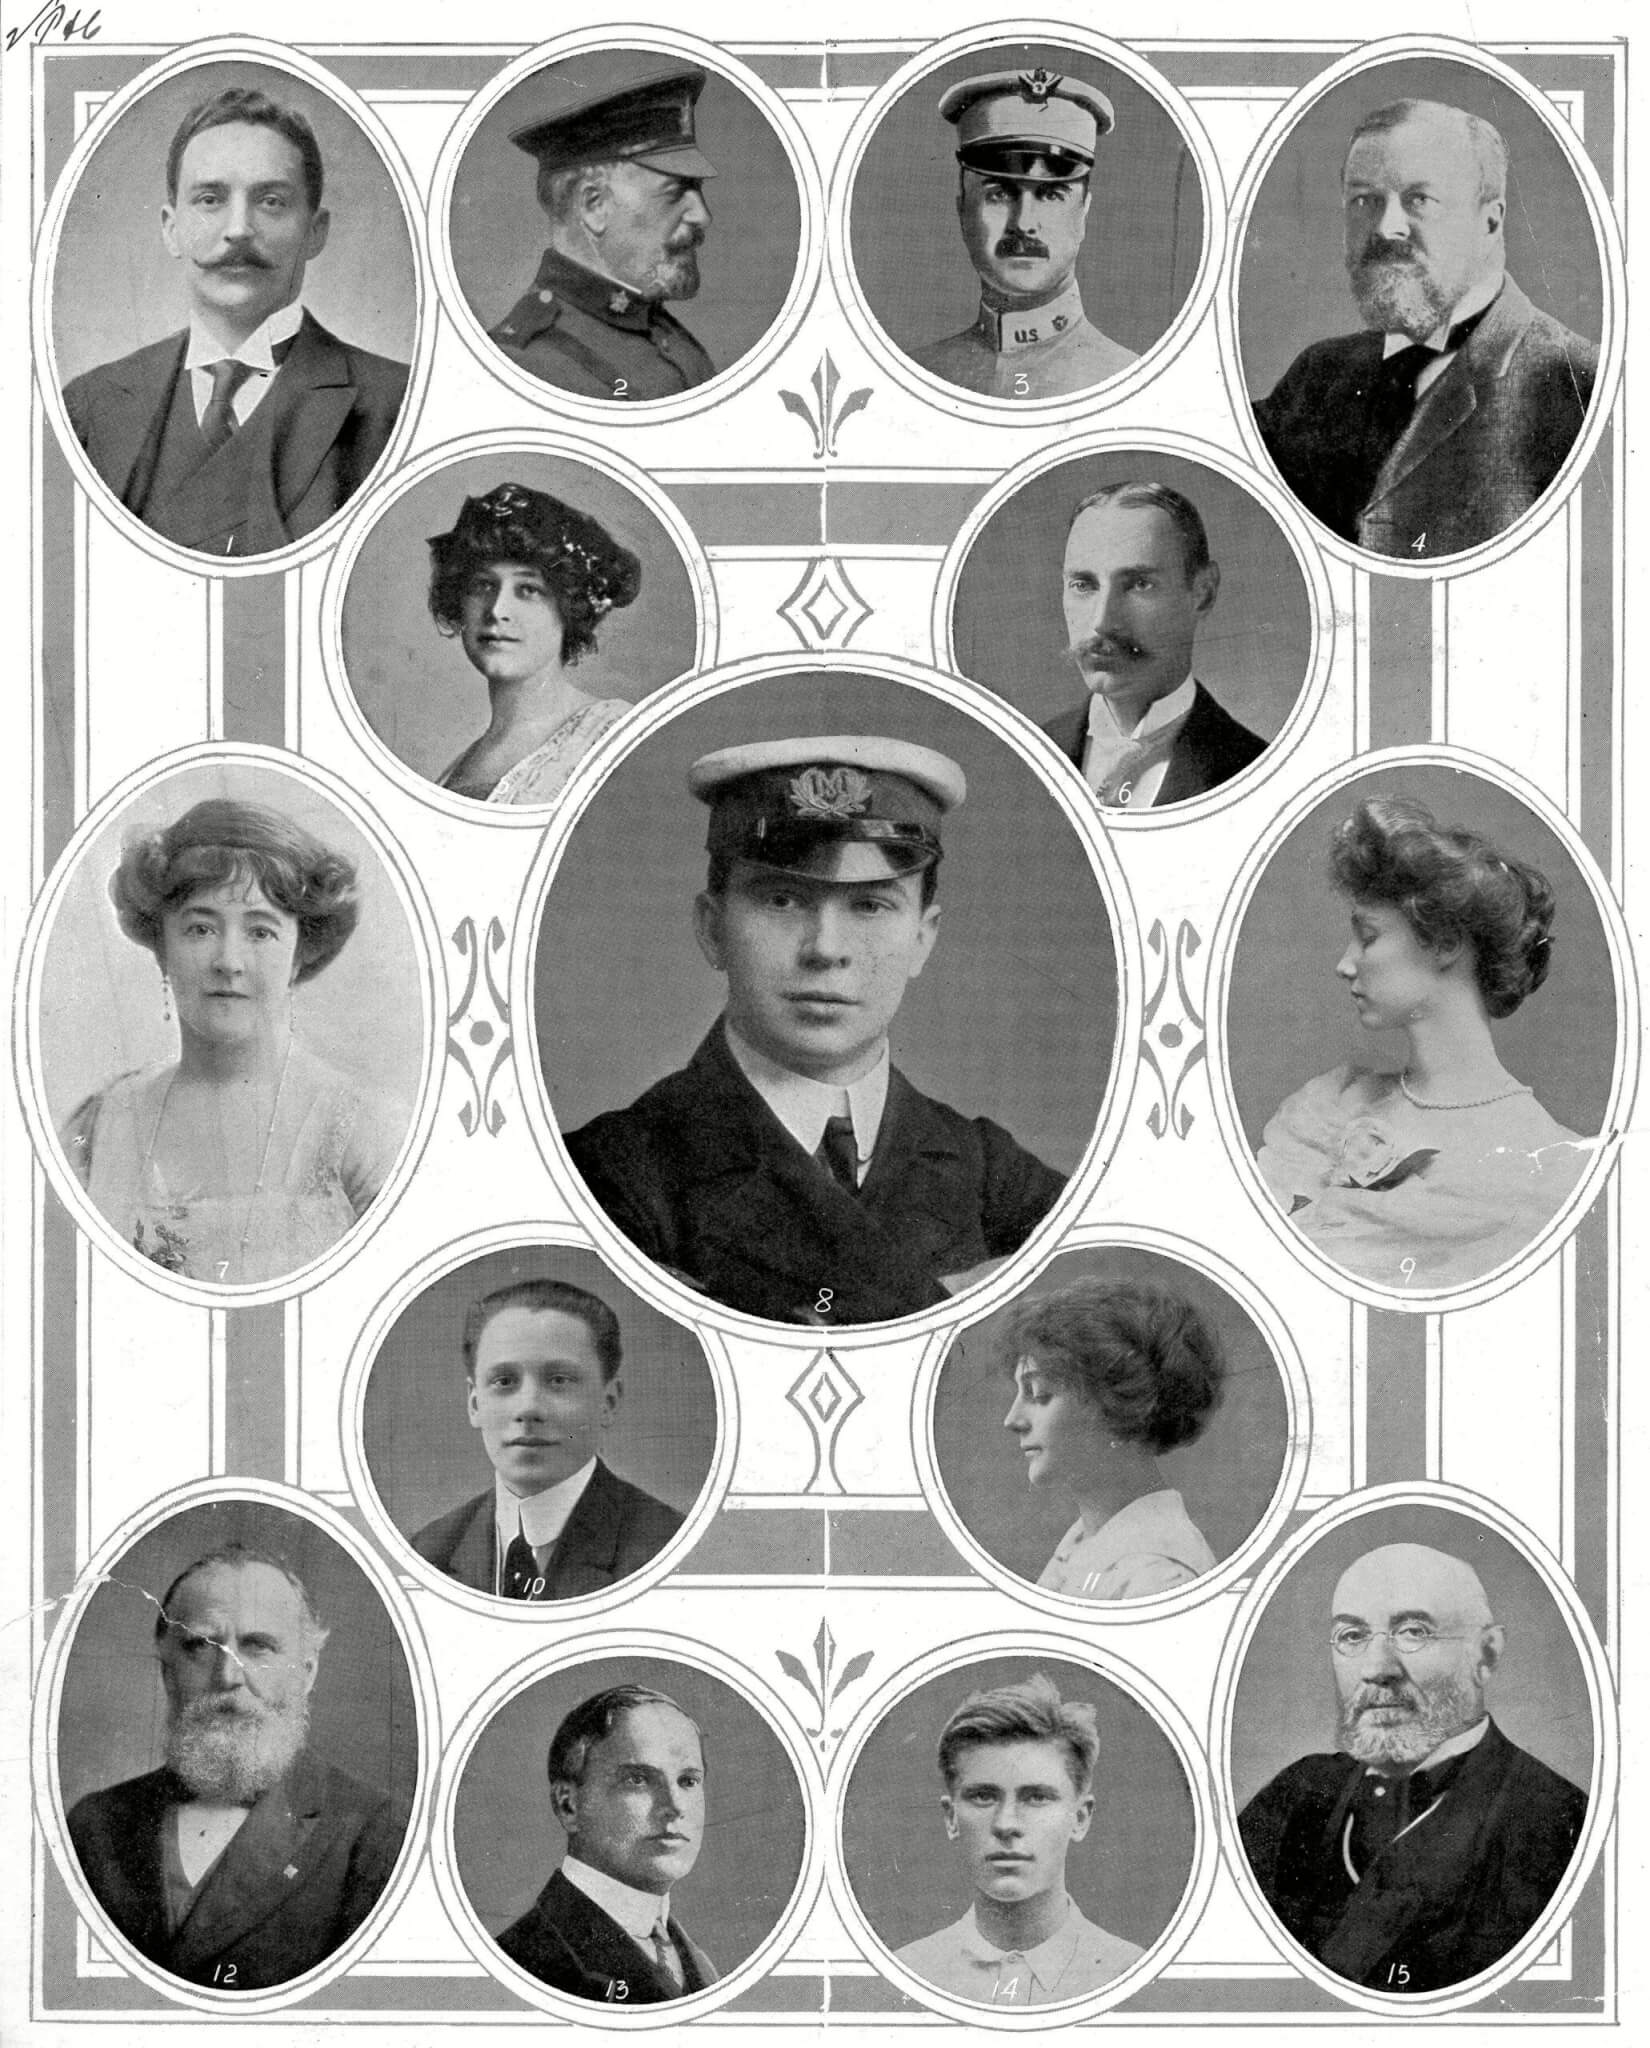 Notable Passengers On Board the Titanic: 1. Mr Bruce Ismay Chairman of the White Star Line Survivor. 2. Major A Peuchen of the Canadian Rifles Survivor. 3. Major A W Butt Aide-de-camp to President Taft. 4. Mr C M Hays President of the Grand Trunk Railway Died. 5. Mrs J J Astor Survivor. 6. Colonel J J Astor Multi-millionaire Died. 7. Lady Cosmo Duff-gordon Survivor. 8. Mr Jack Phillips Wireless Operator On the Titanic Died. 9. the Countess of Rothes Survivor. 10. Mr Daniel Marvin Son of the Head of A American Cinematograph Firm Died. 11. Mrs Daniel Marvin Survivor. 12. Mr W T Stead Journalist. 13. Mr Benjamin Guggenheim an American Banker and Multi-millionaire Died. 14. Mr Karl H Behr Lawn Tennis Player Survivor. 15. Mr Isidor Straus A Member of Congress and A Multi Millionaire Banker. the Illustrated London News. 20th April 1912. Main Pic. by N/a.